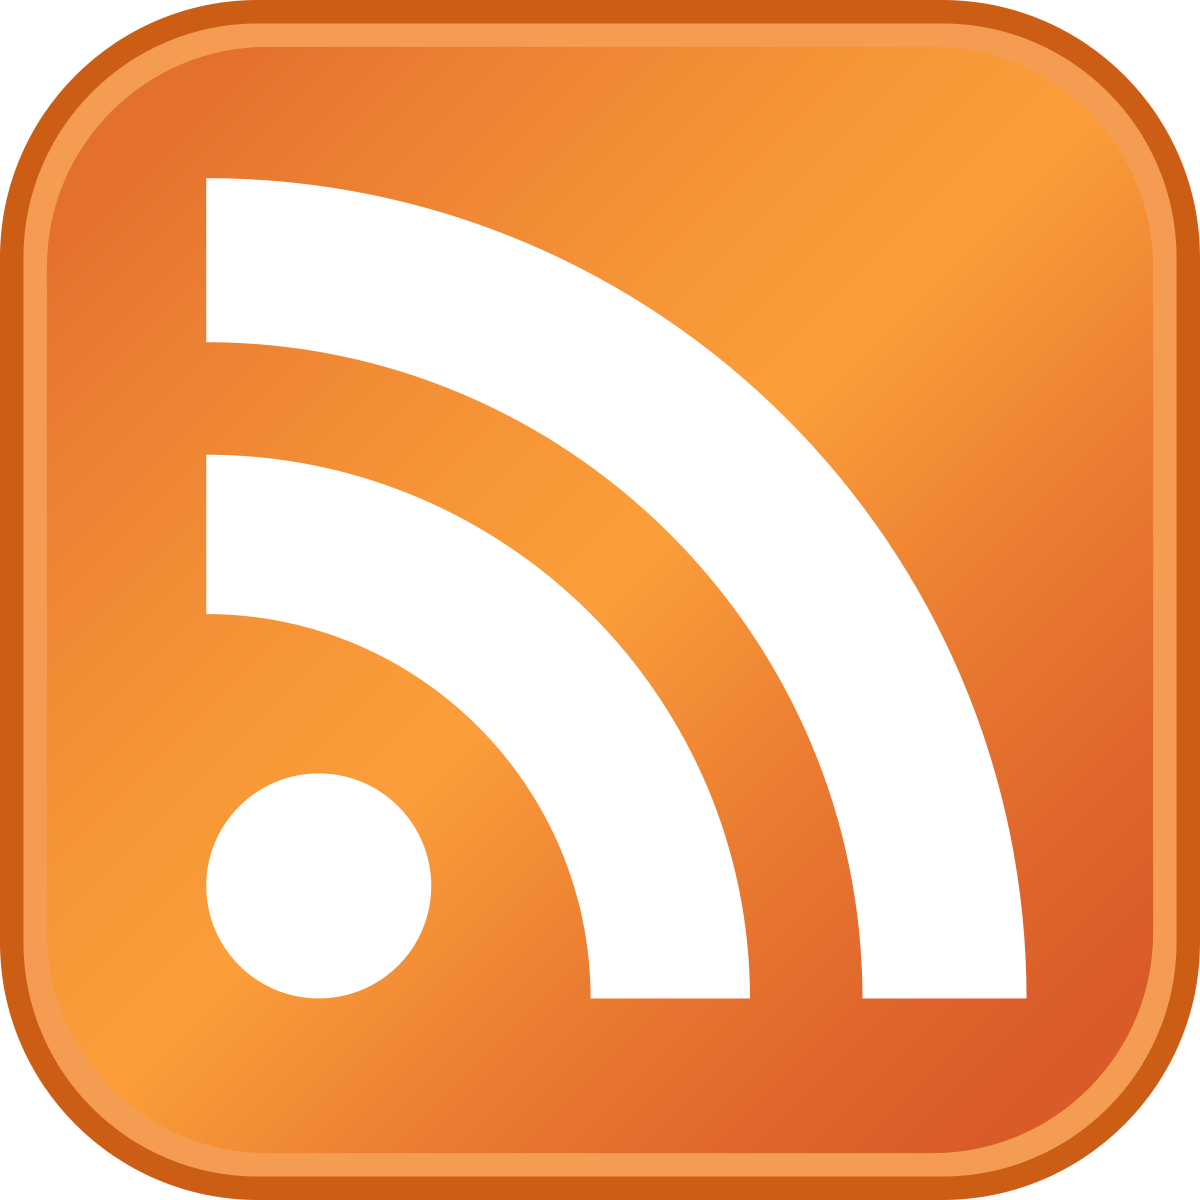 get rss feed from website